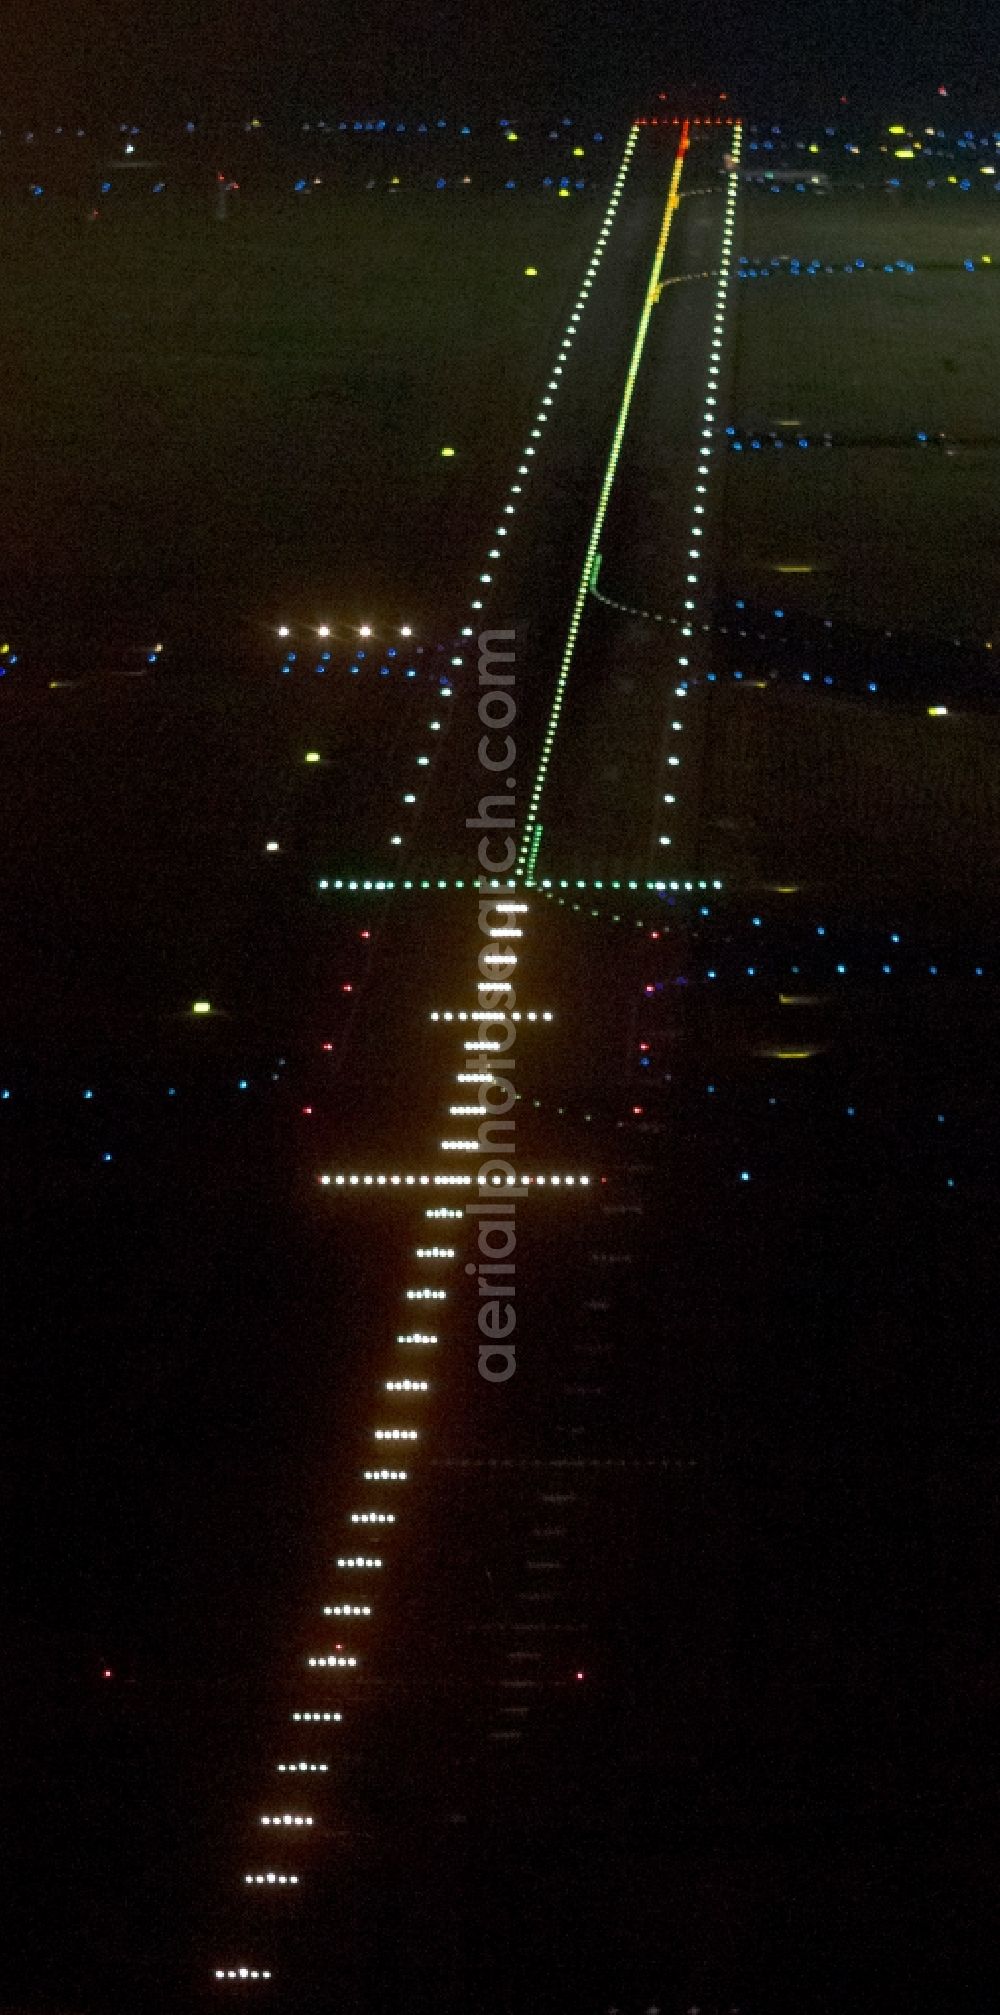 Düsseldorf at night from above - Night aerial view of the illuminated runway 07 right at the Dusseldorf airport in North Rhine-Westphalia